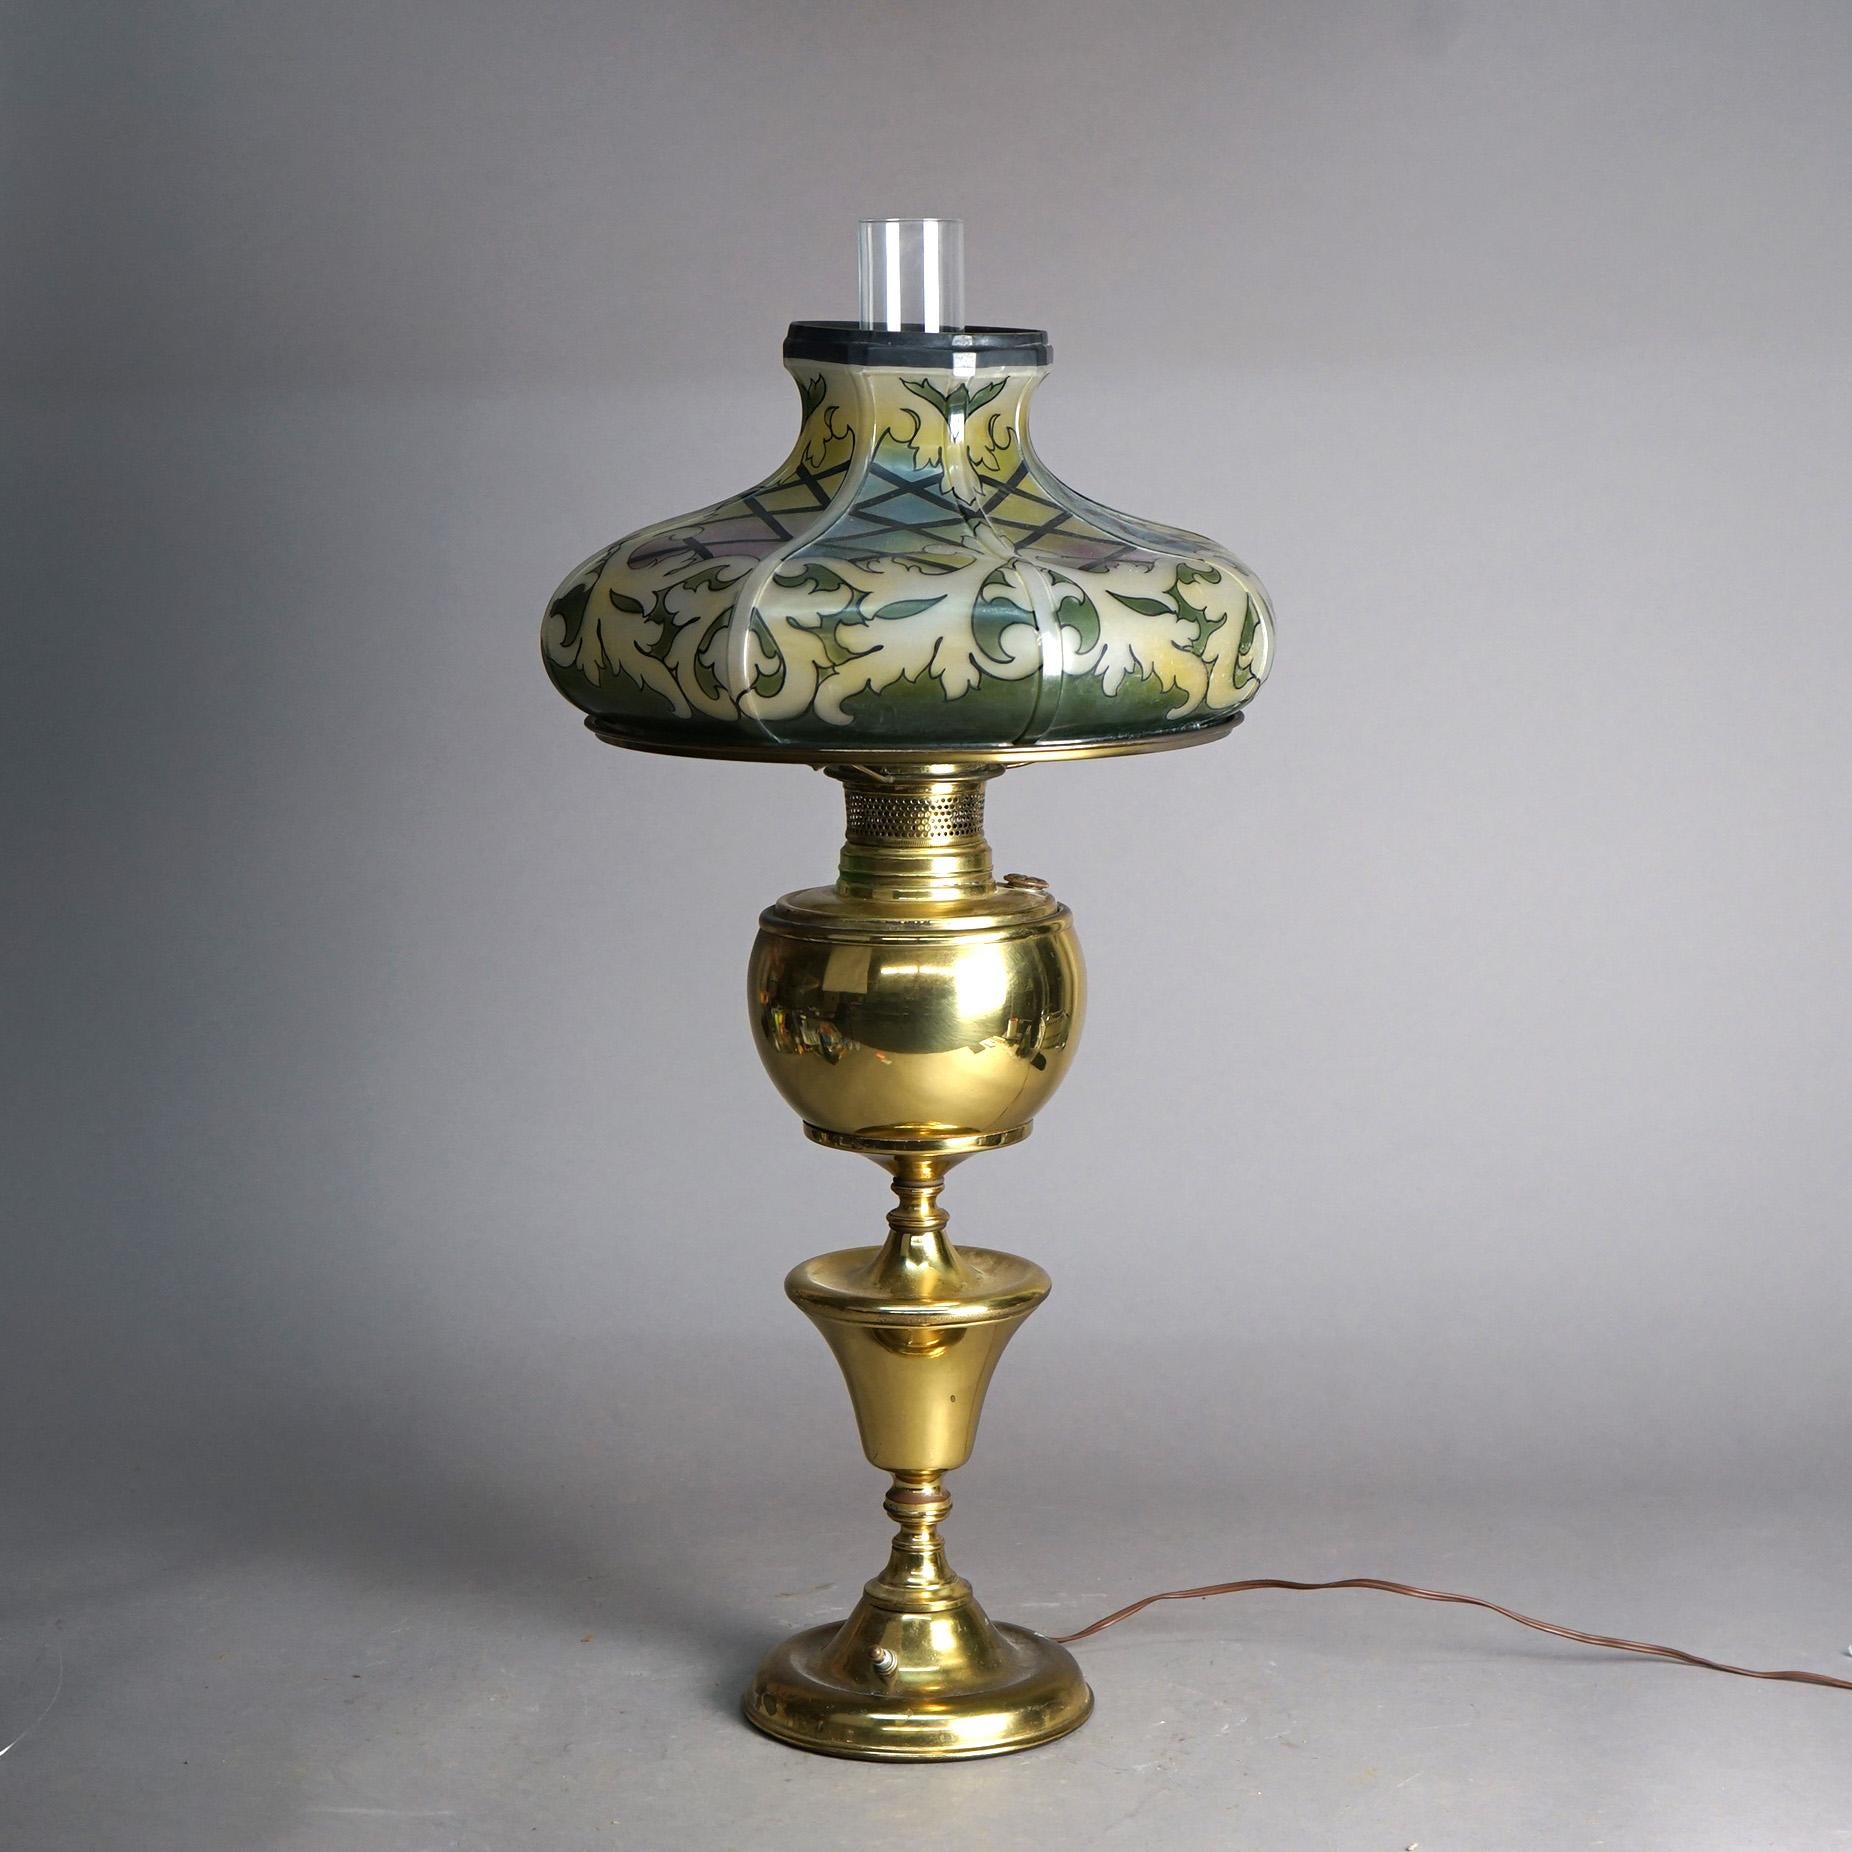 American Antique Arts & Crafts Brass Banquet Lamp & Leaded Glass Style Shade C'1910 For Sale